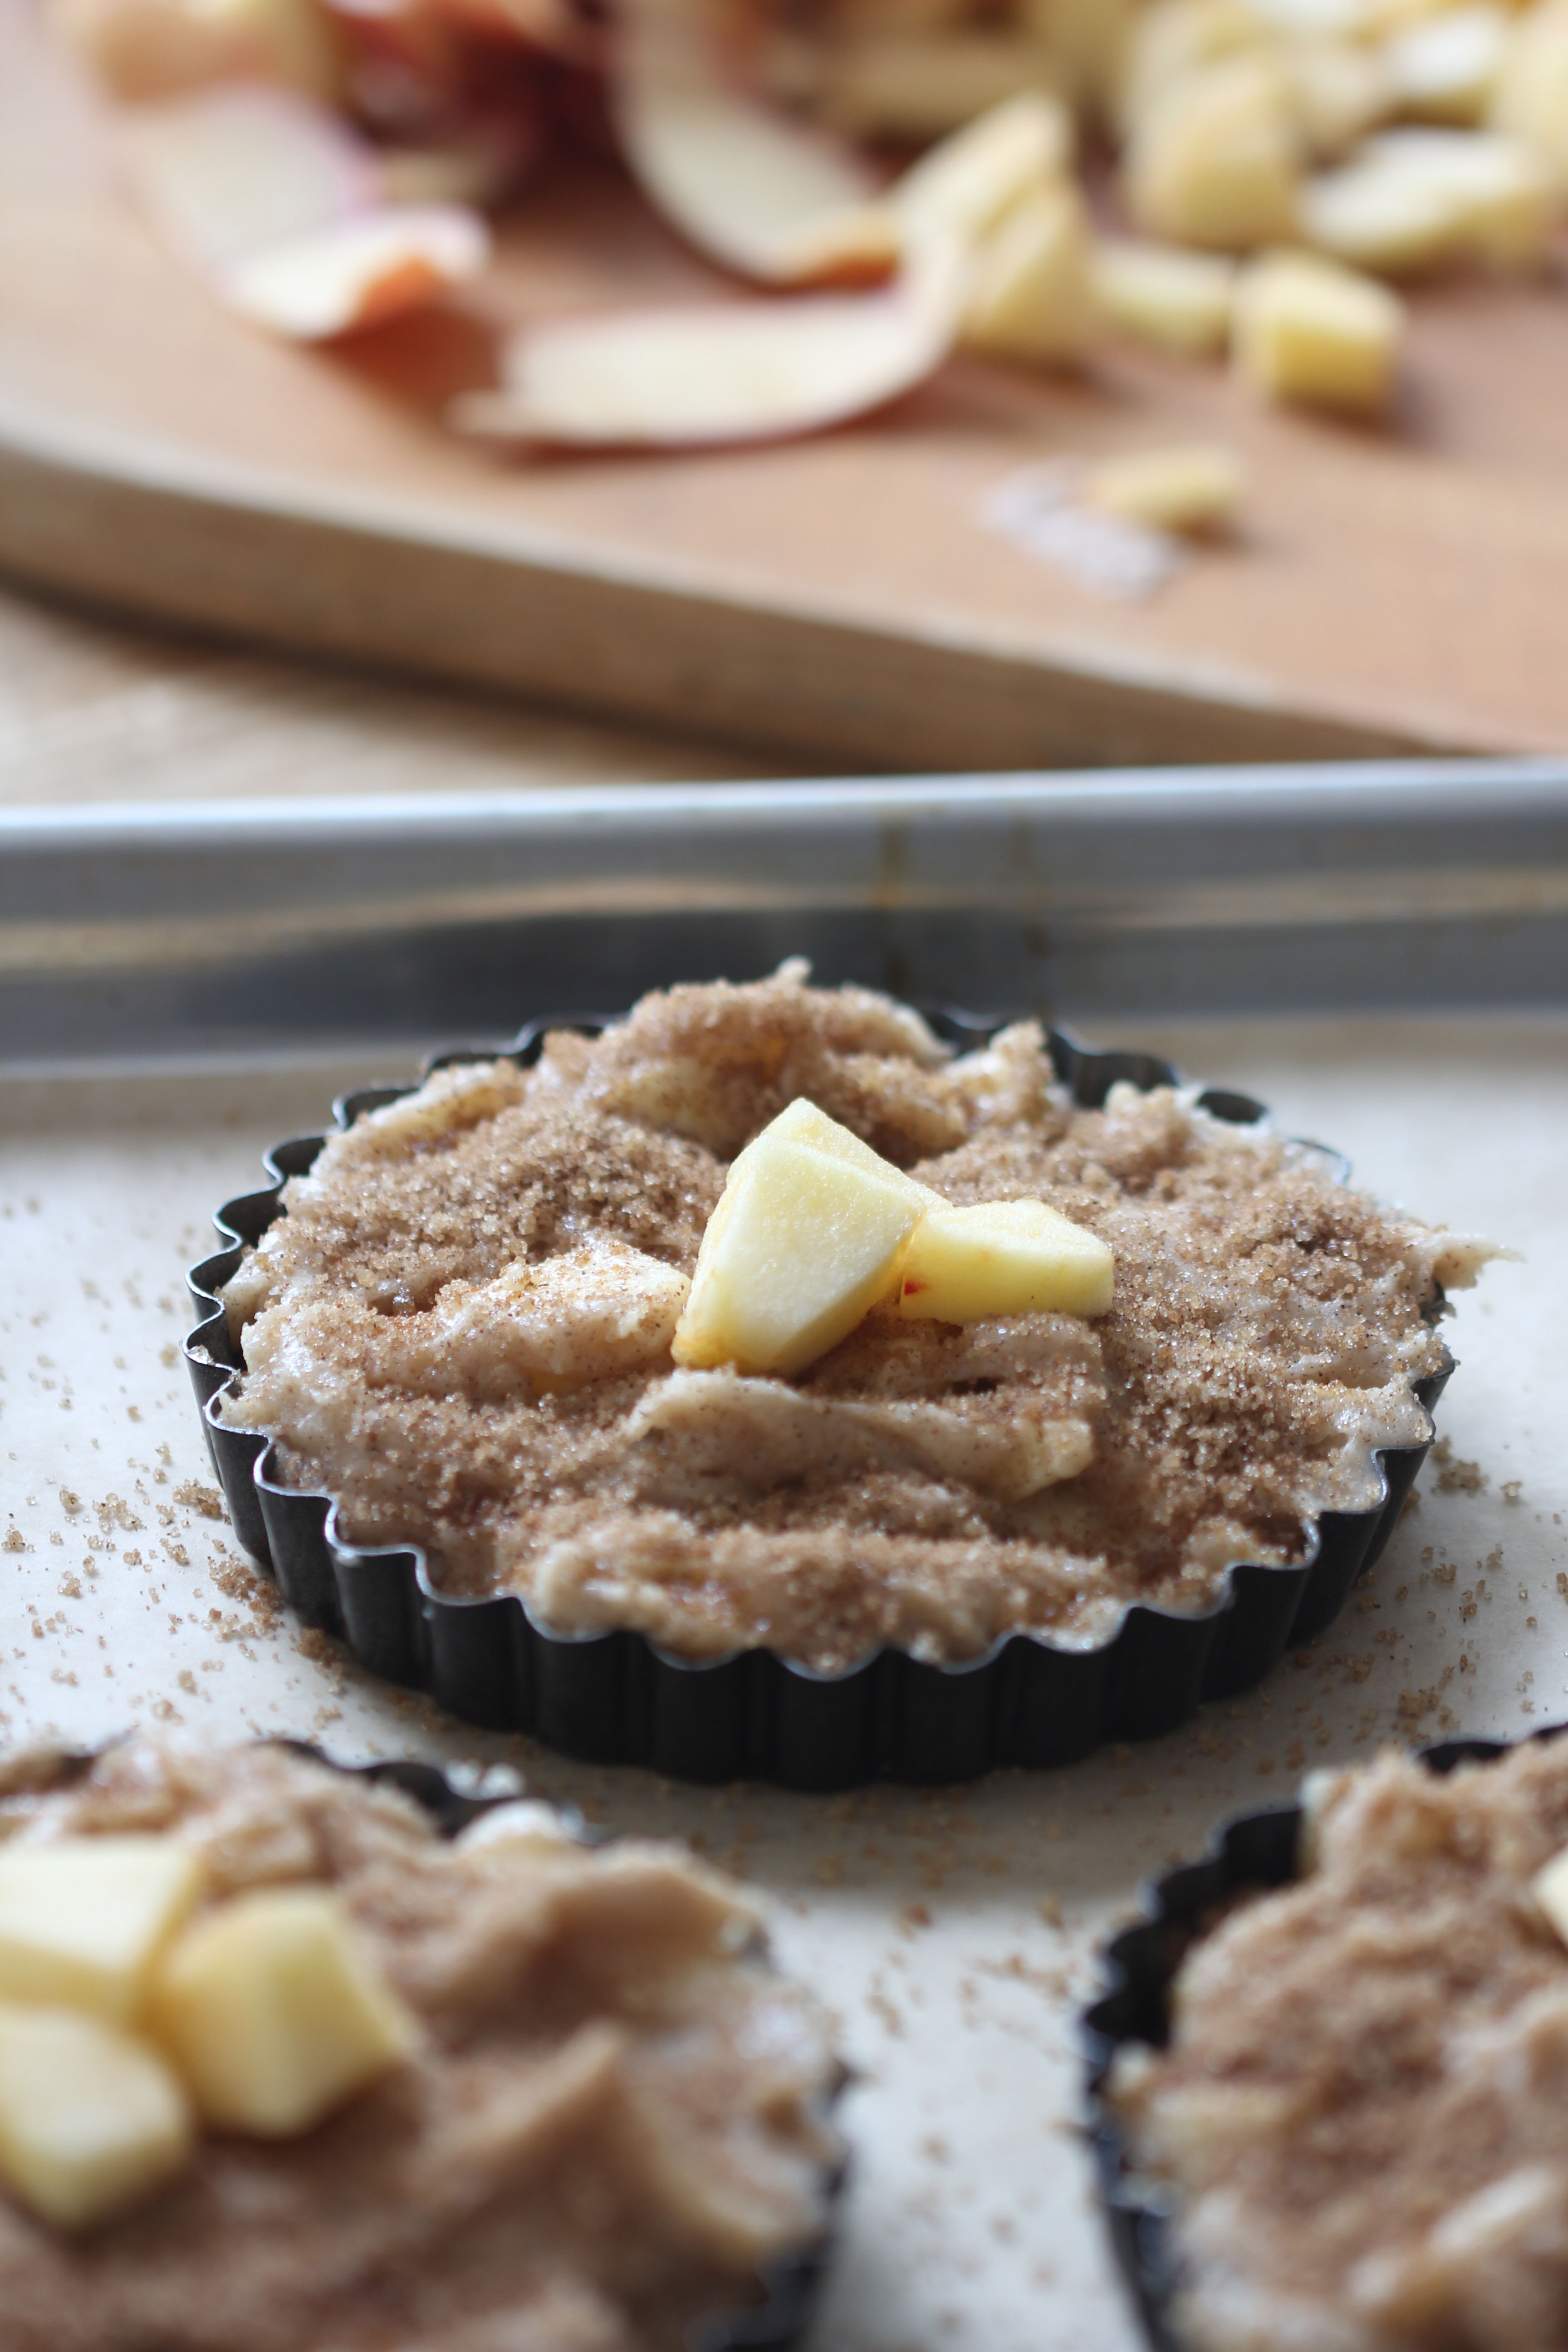 Get into the Fall season with delicious, easy to make individual apple pies that have crispy cookie topping! Plus your guest think you are a master chef!